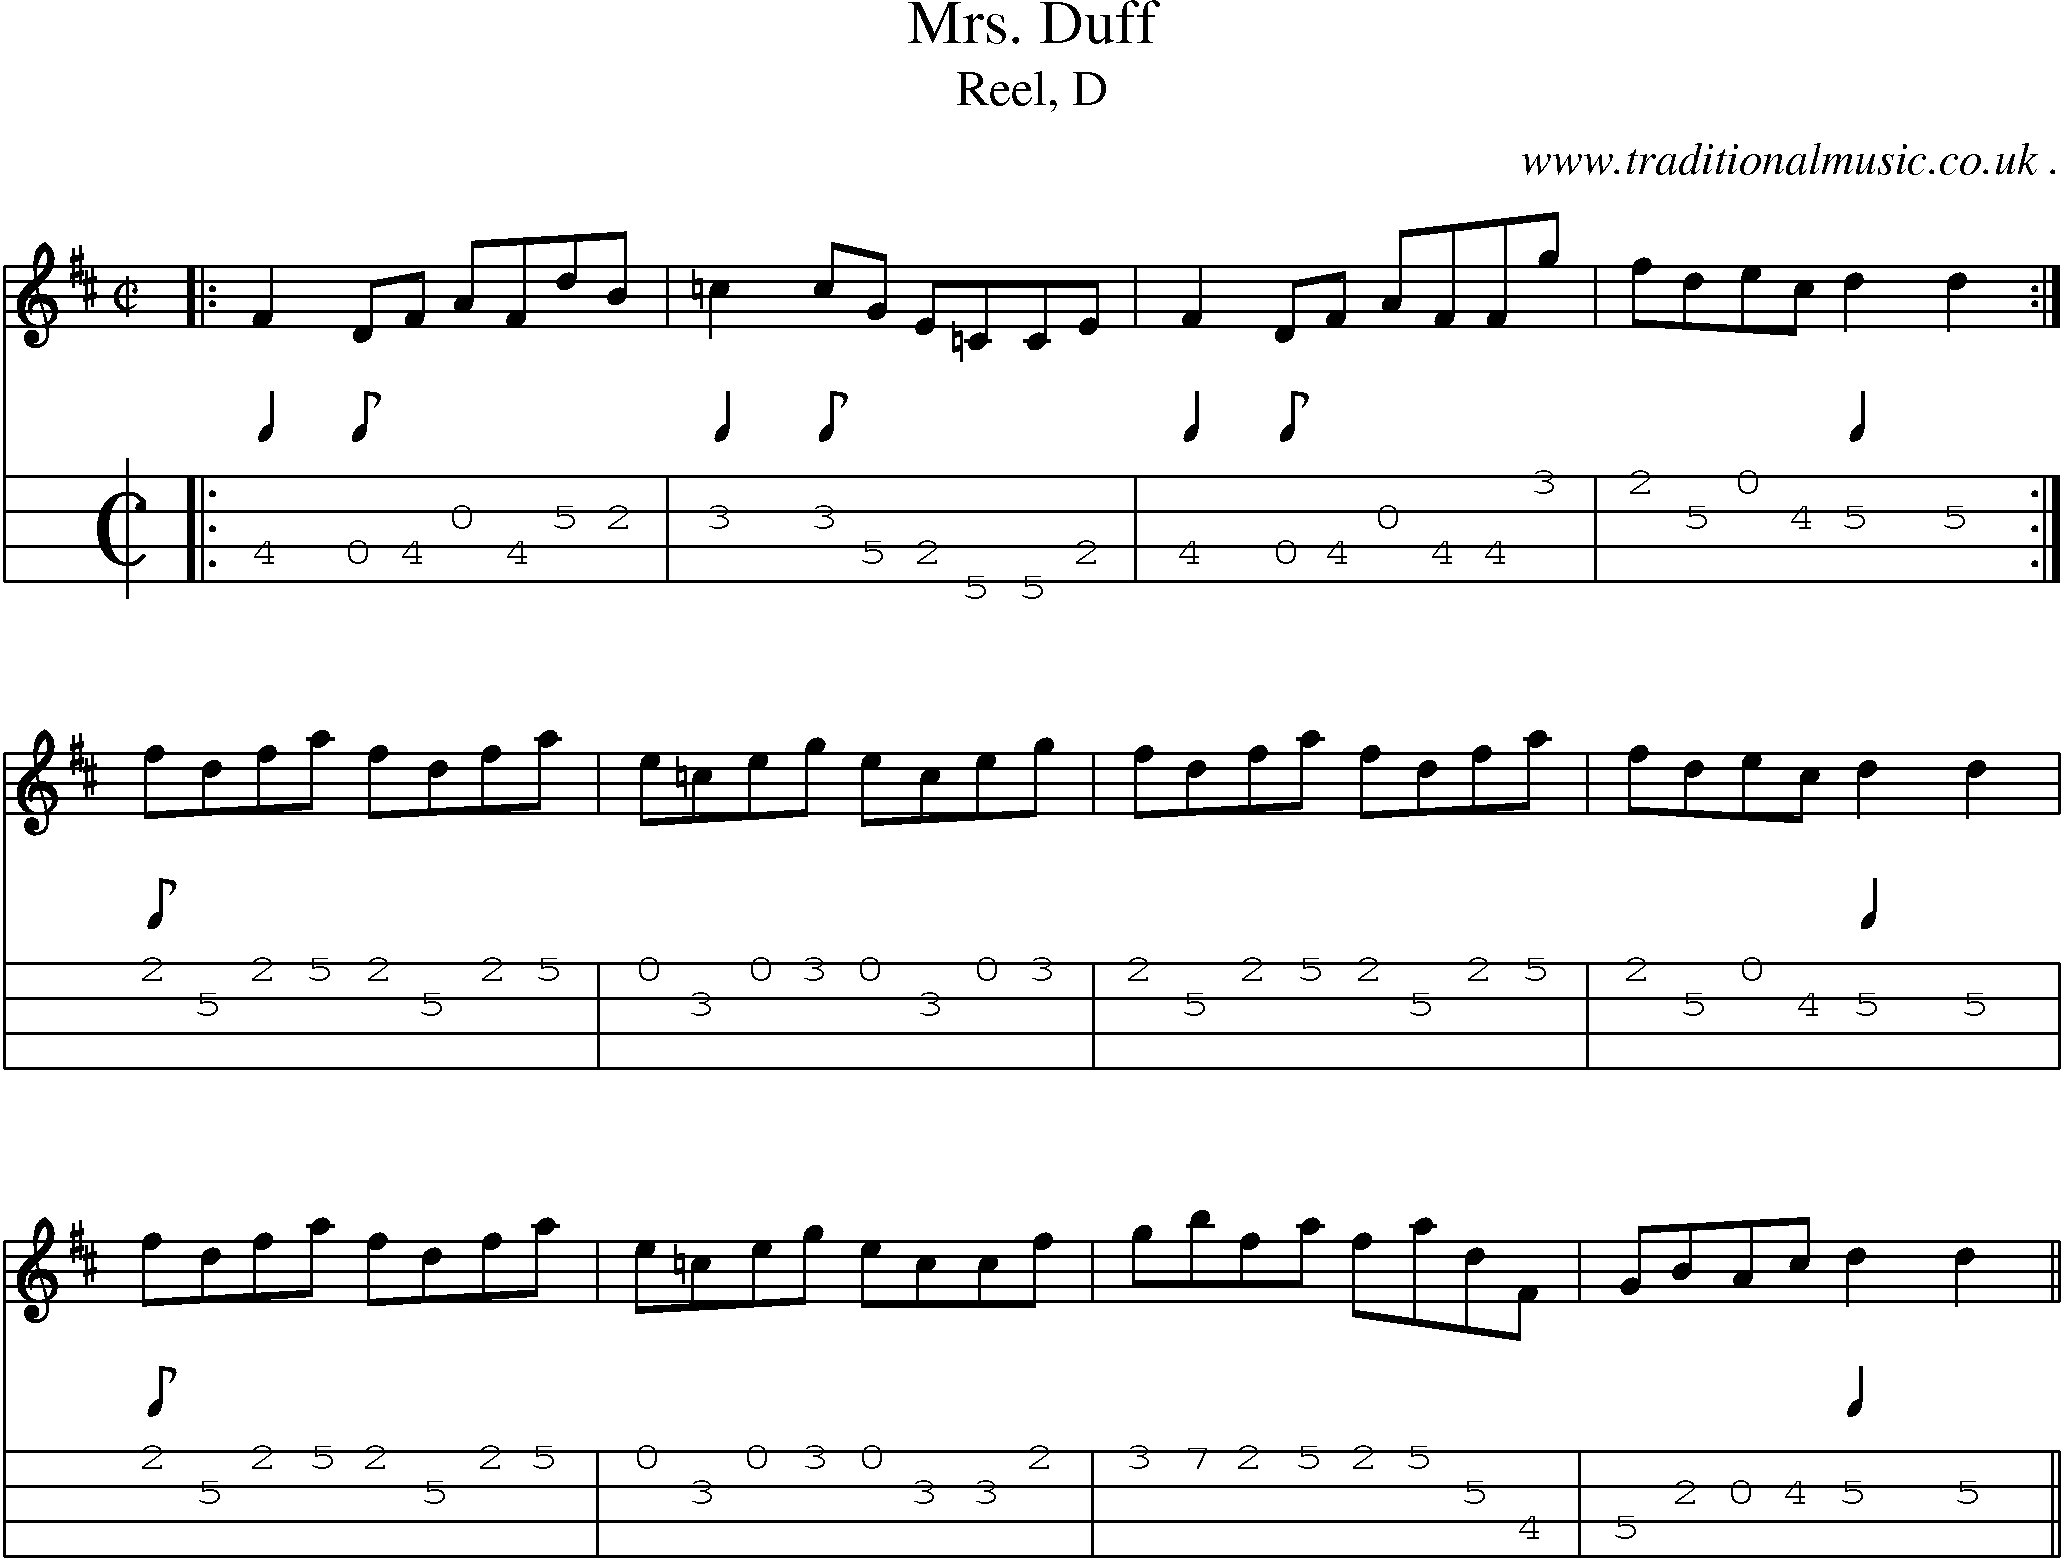 Sheet-music  score, Chords and Mandolin Tabs for Mrs Duff